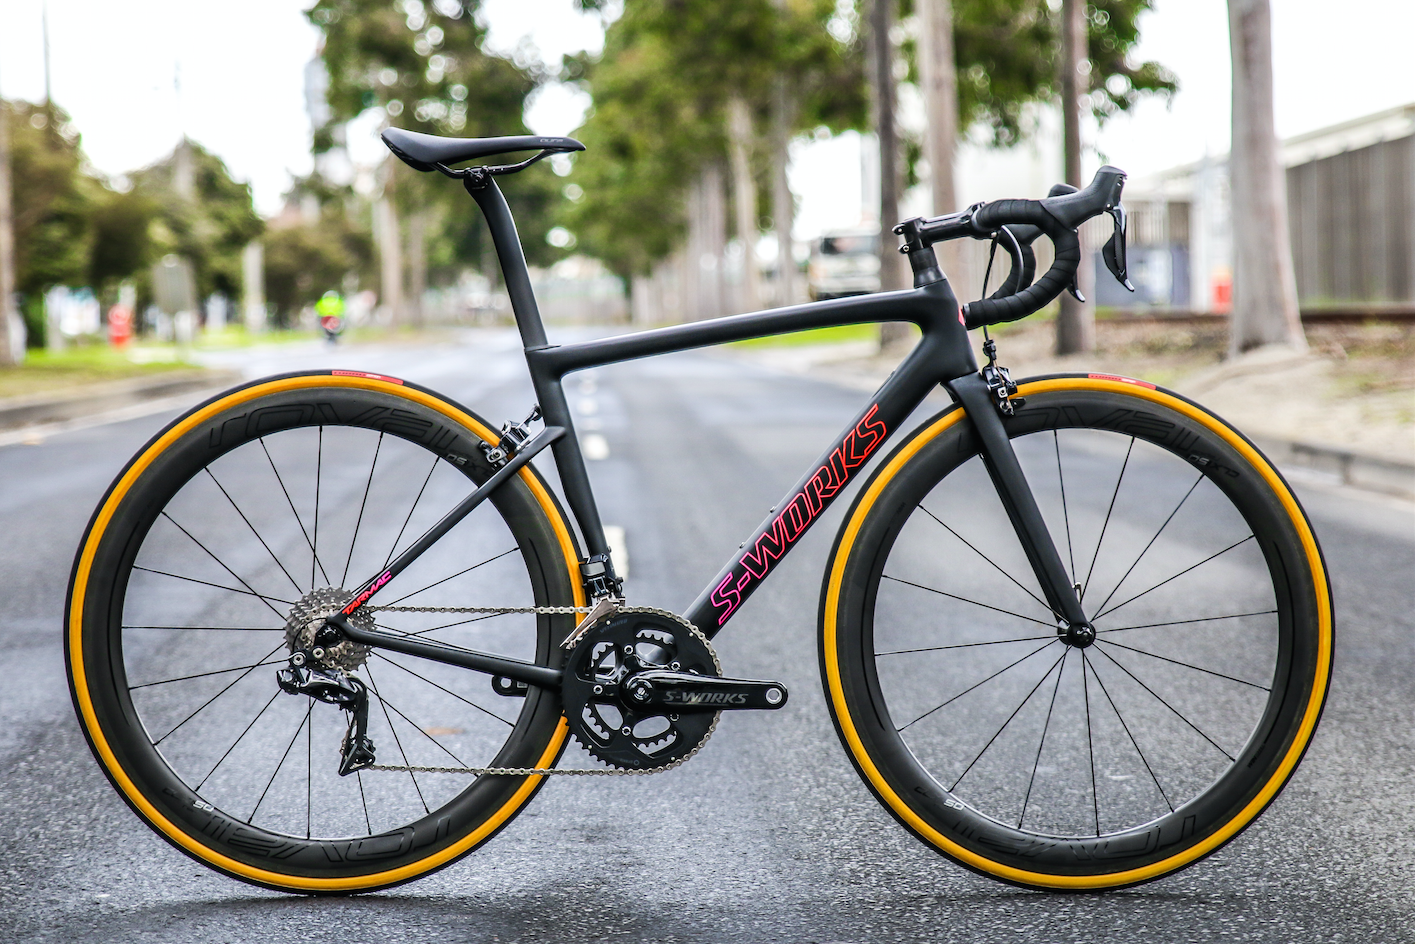 The All-New Specialized 2018 Tarmac